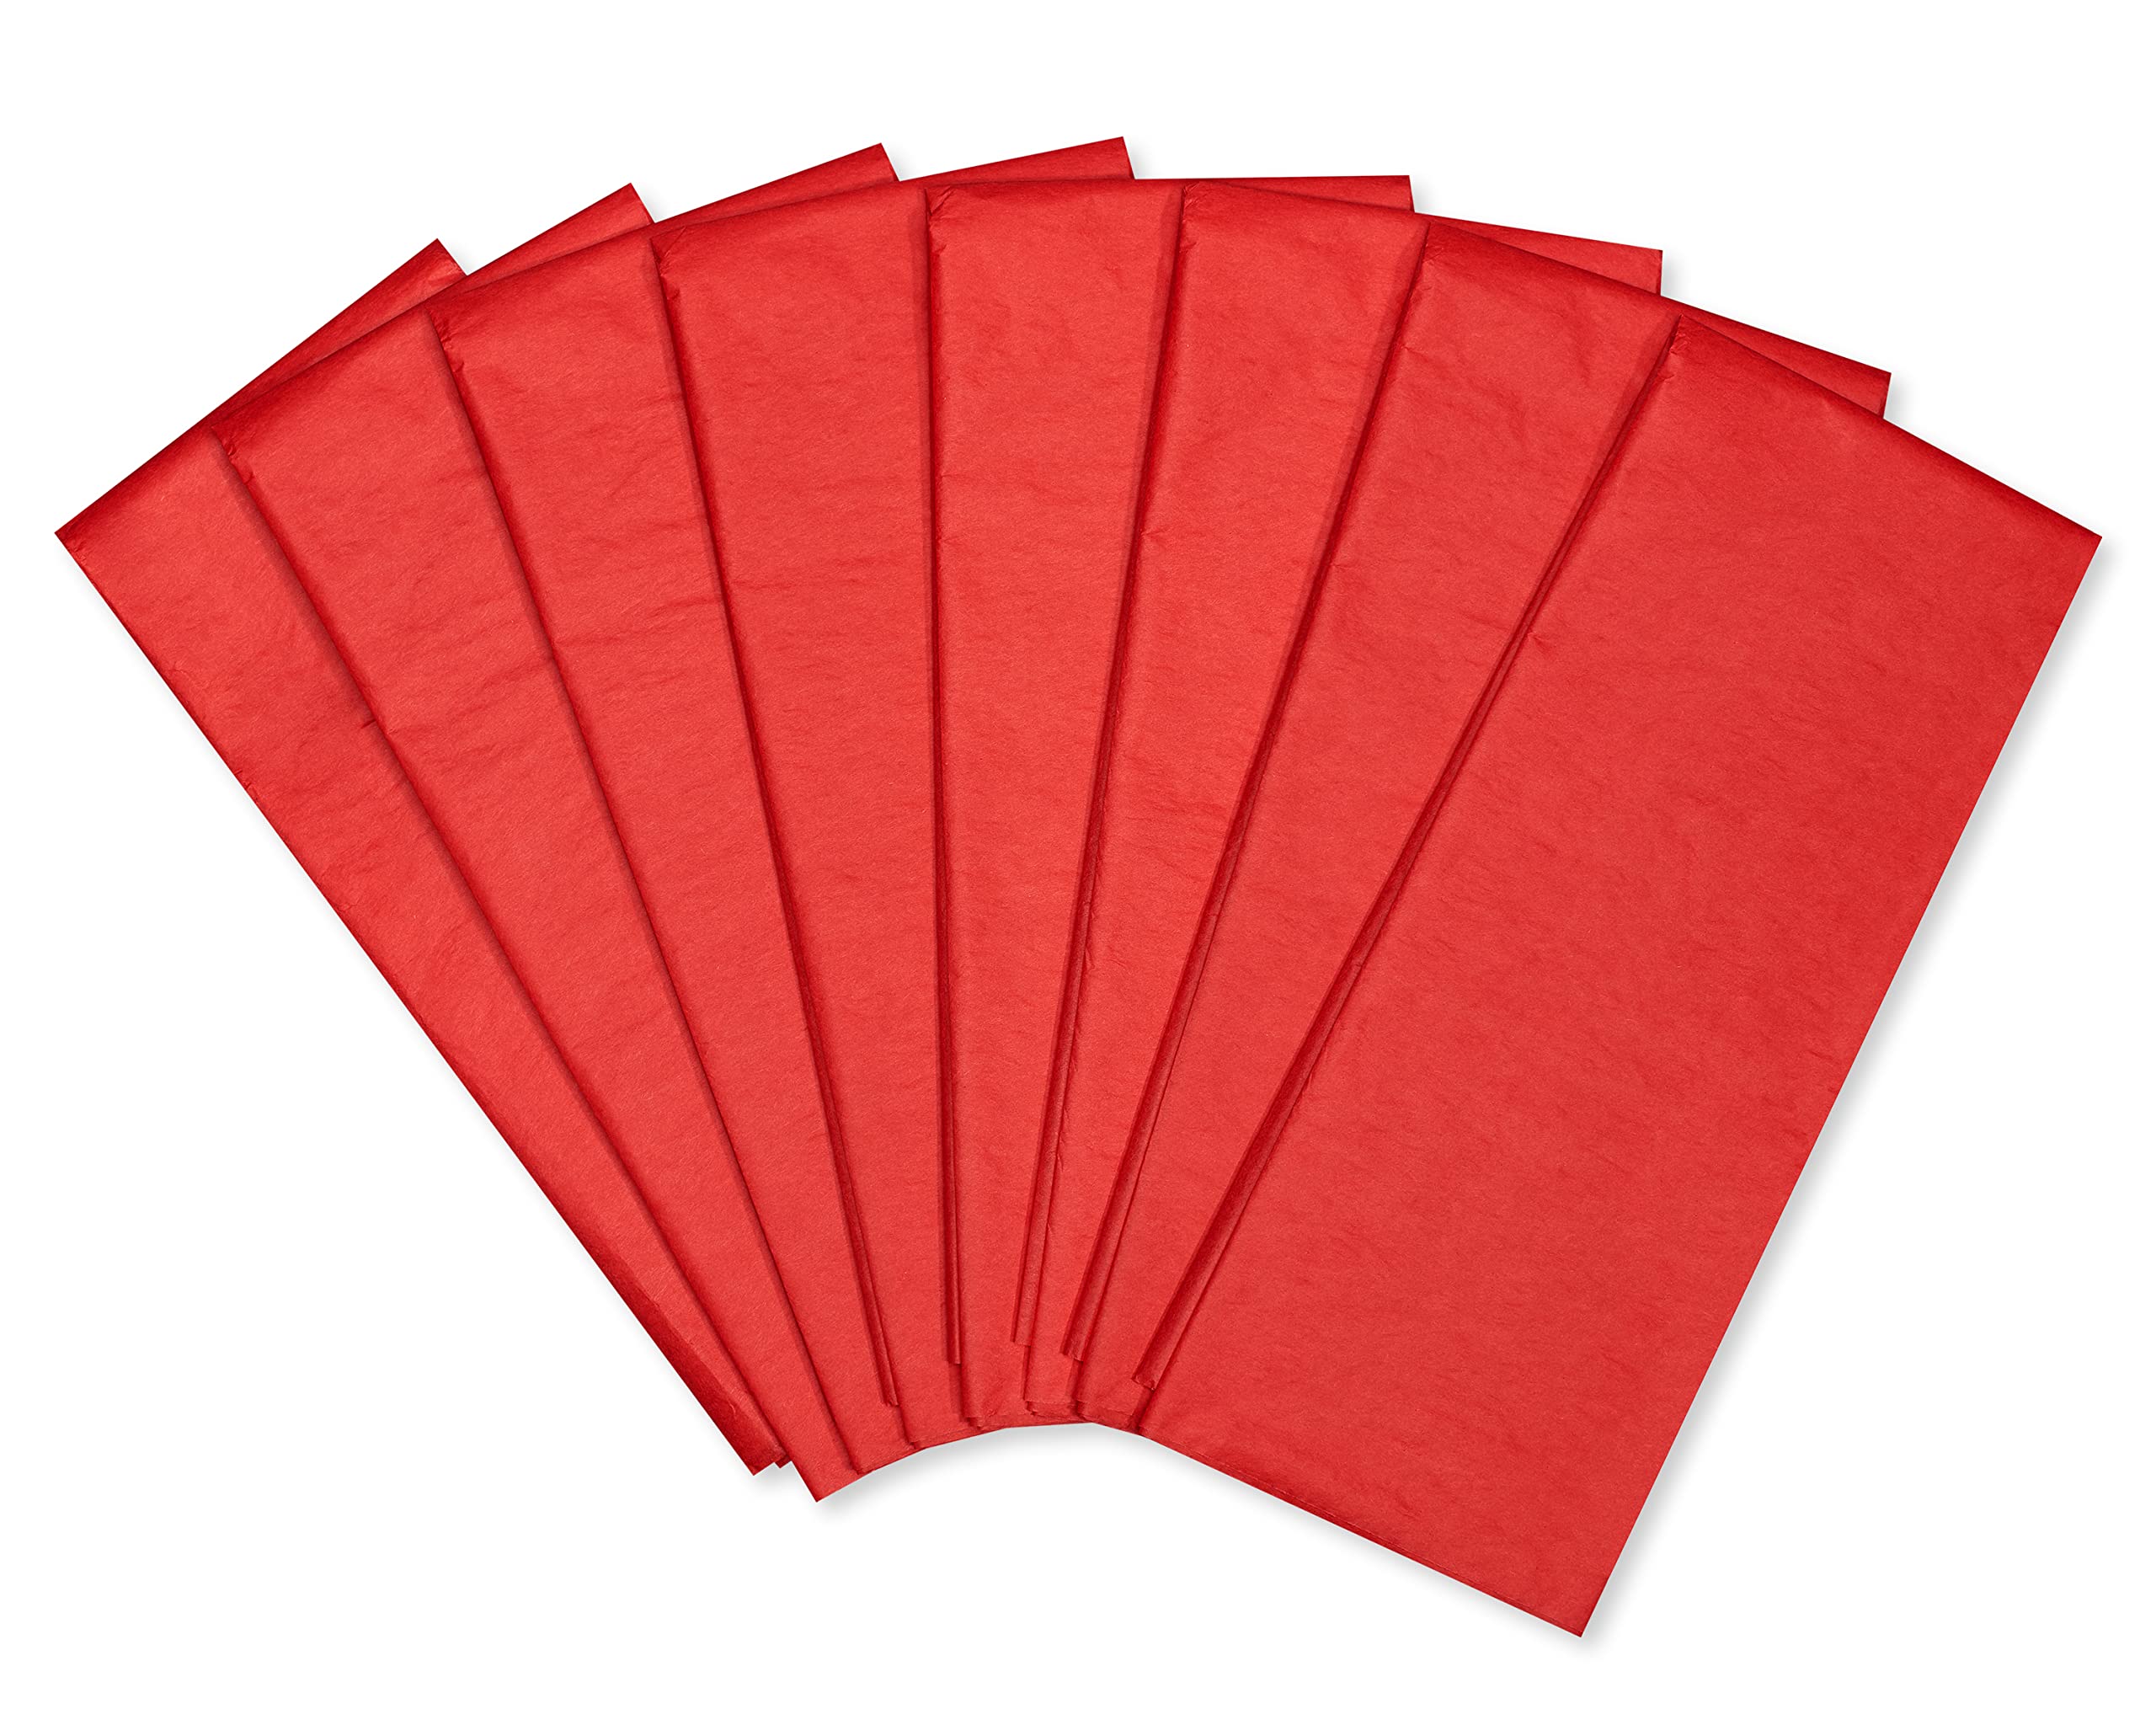 Papyrus 8 Sheet Scarlet Tissue Paper for Gifts, Decorations, Crafts, DIY and More